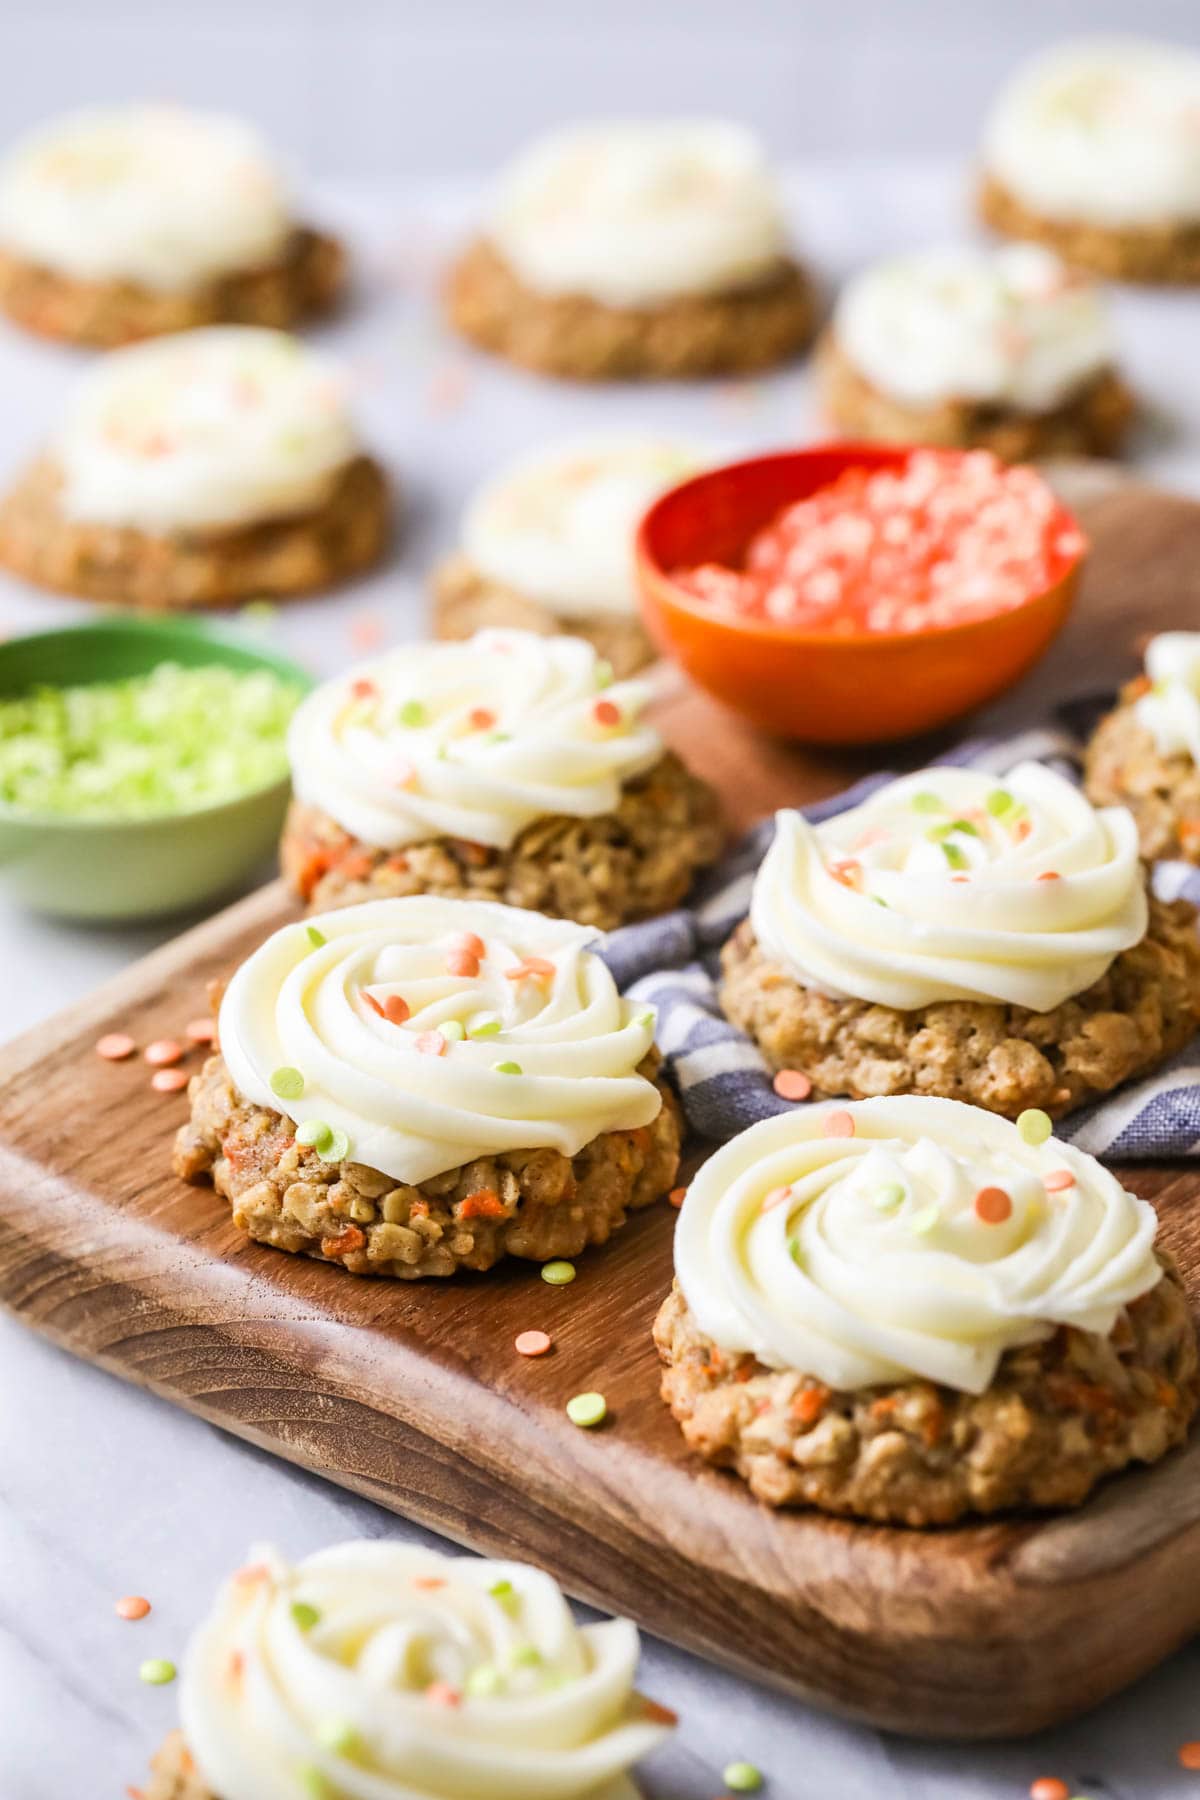 Carrot cake cookies toped with cream cheese frosting and sprinkles on a wood cutting board.